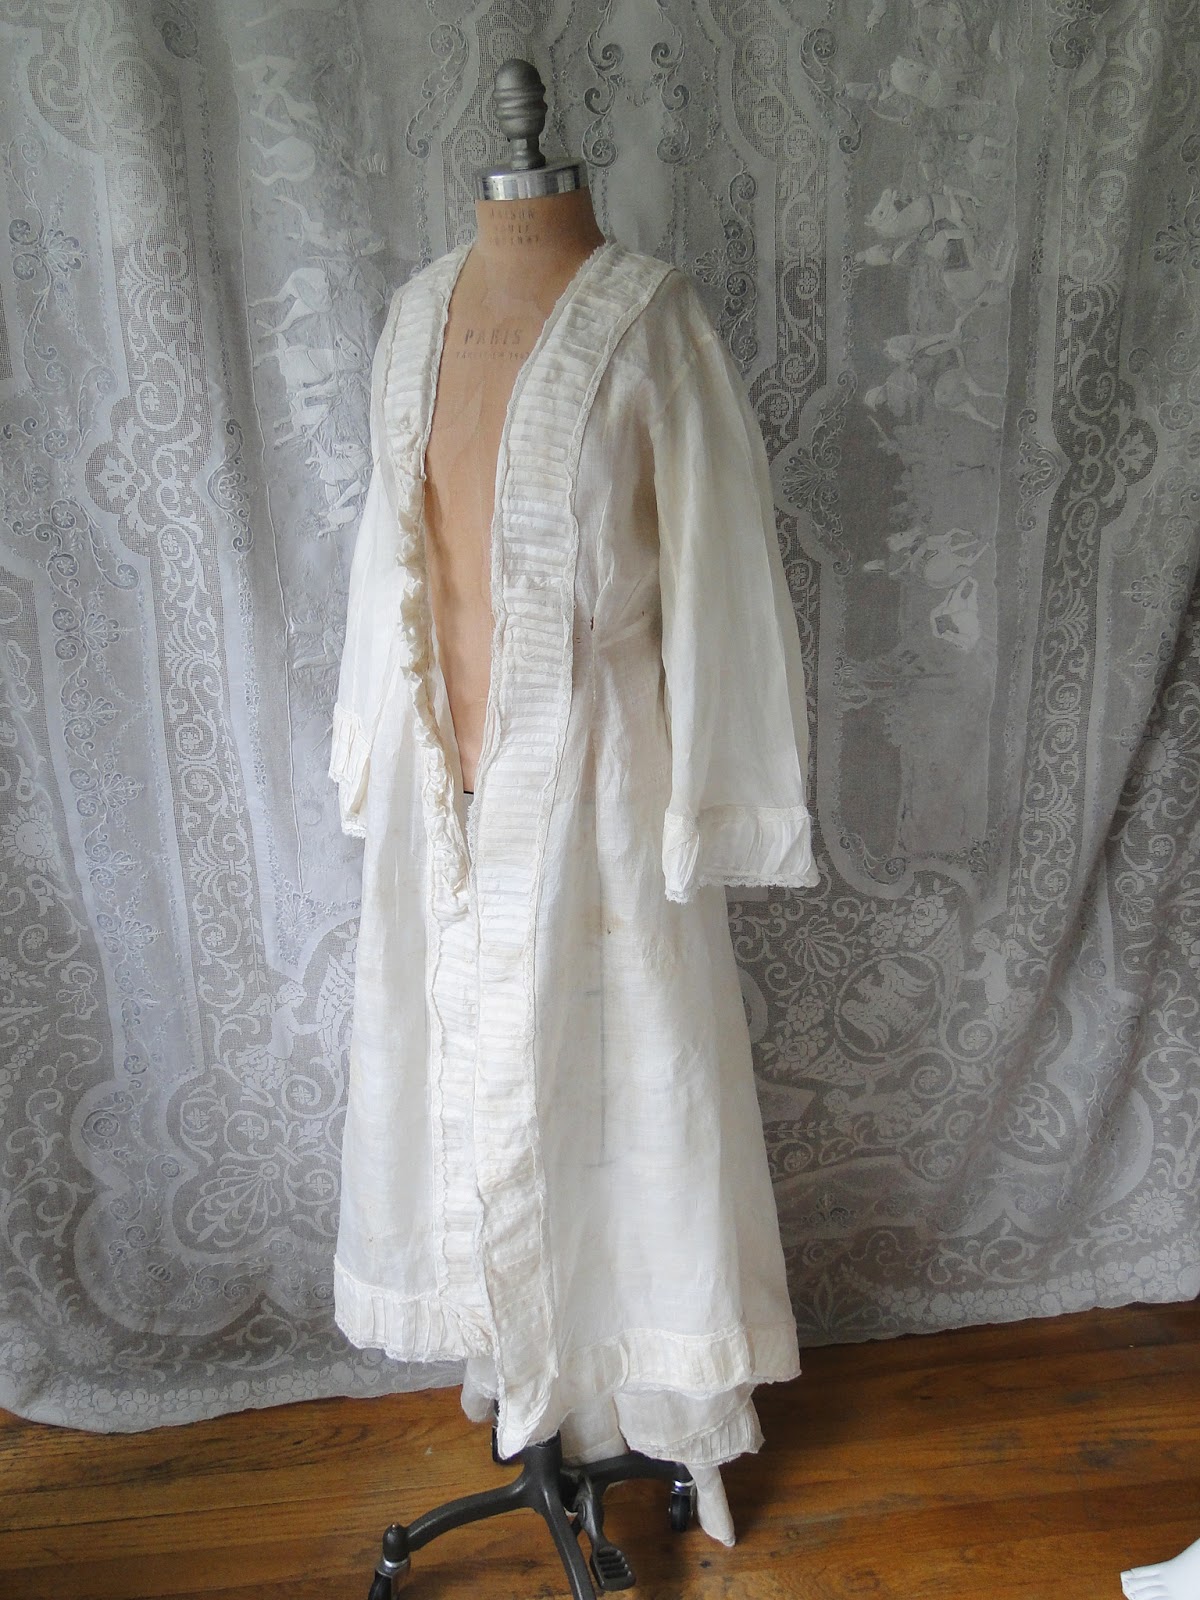 CIRCA 1860,FINE LINEN COAT/ROBE WITH PAGODA SLEEVES,MRS.WARD THORON  BEQUEST,MUSEUM DEACCESSION